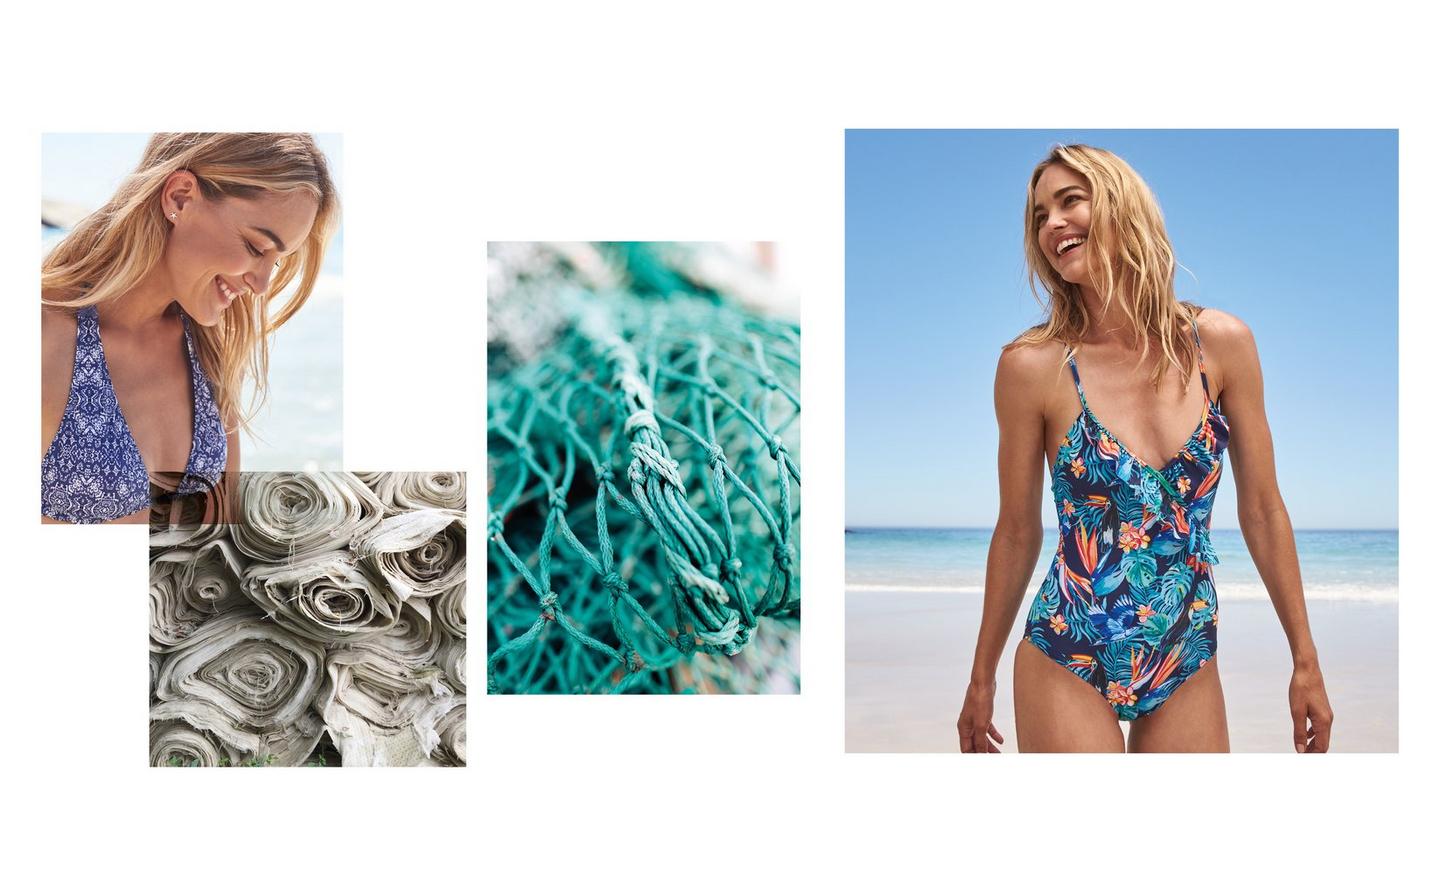 FatFace printed swimwear, made with eco-friendly fabric that’s better for the environment